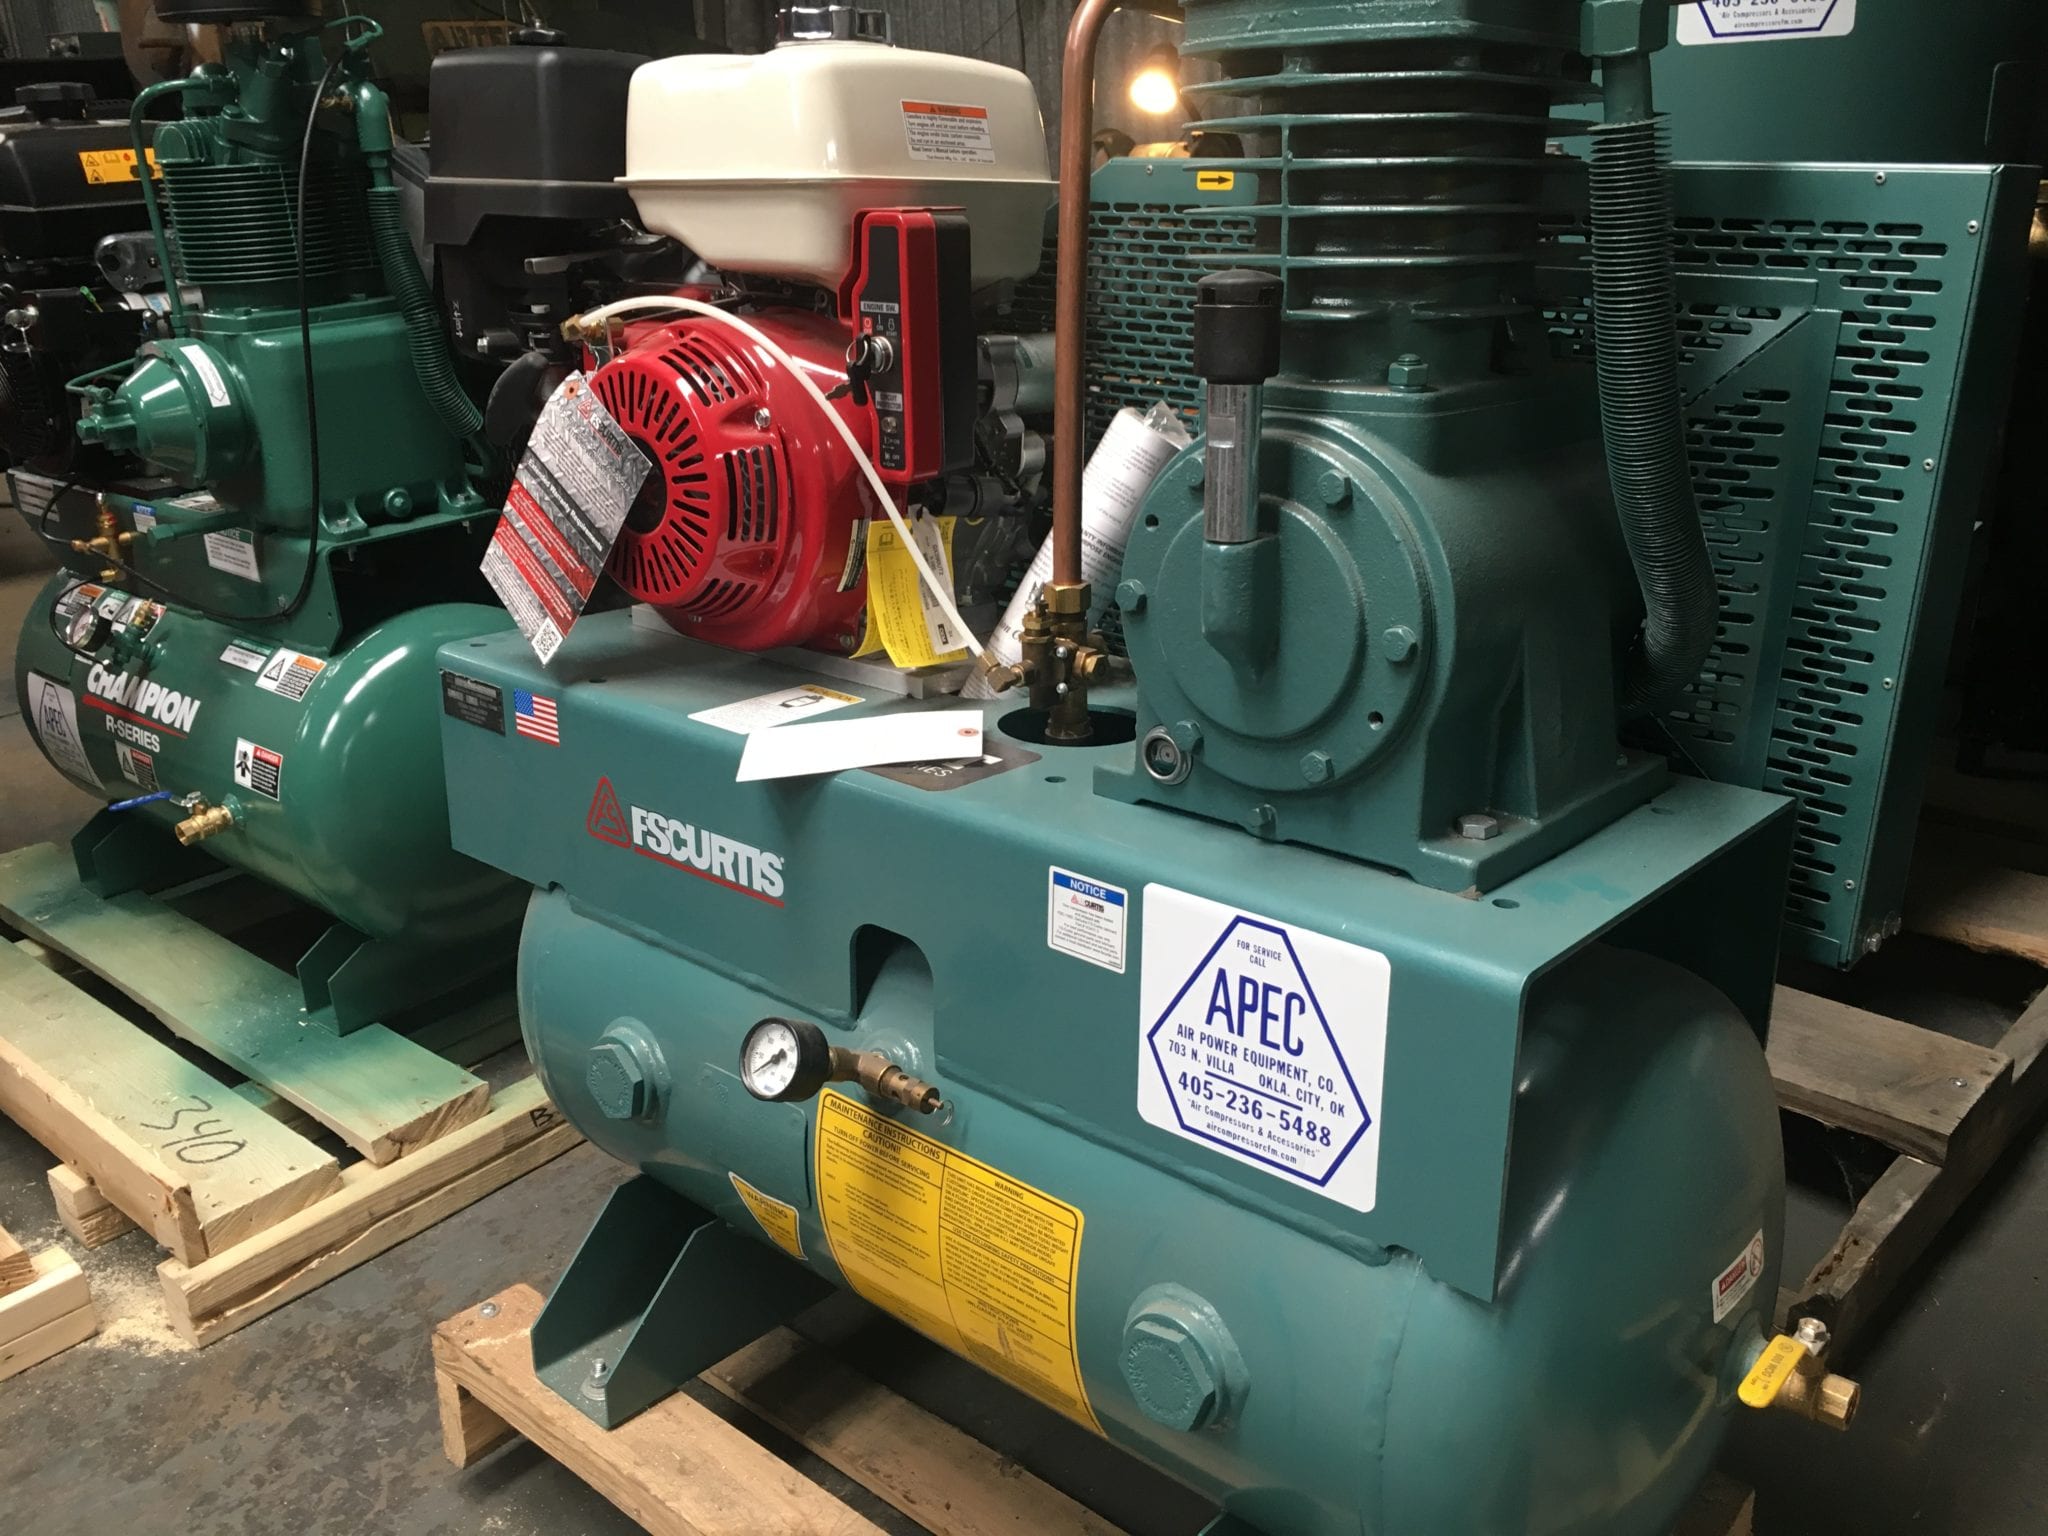 Air Power Equipment Co is troubleshooting air compressors in OKC!